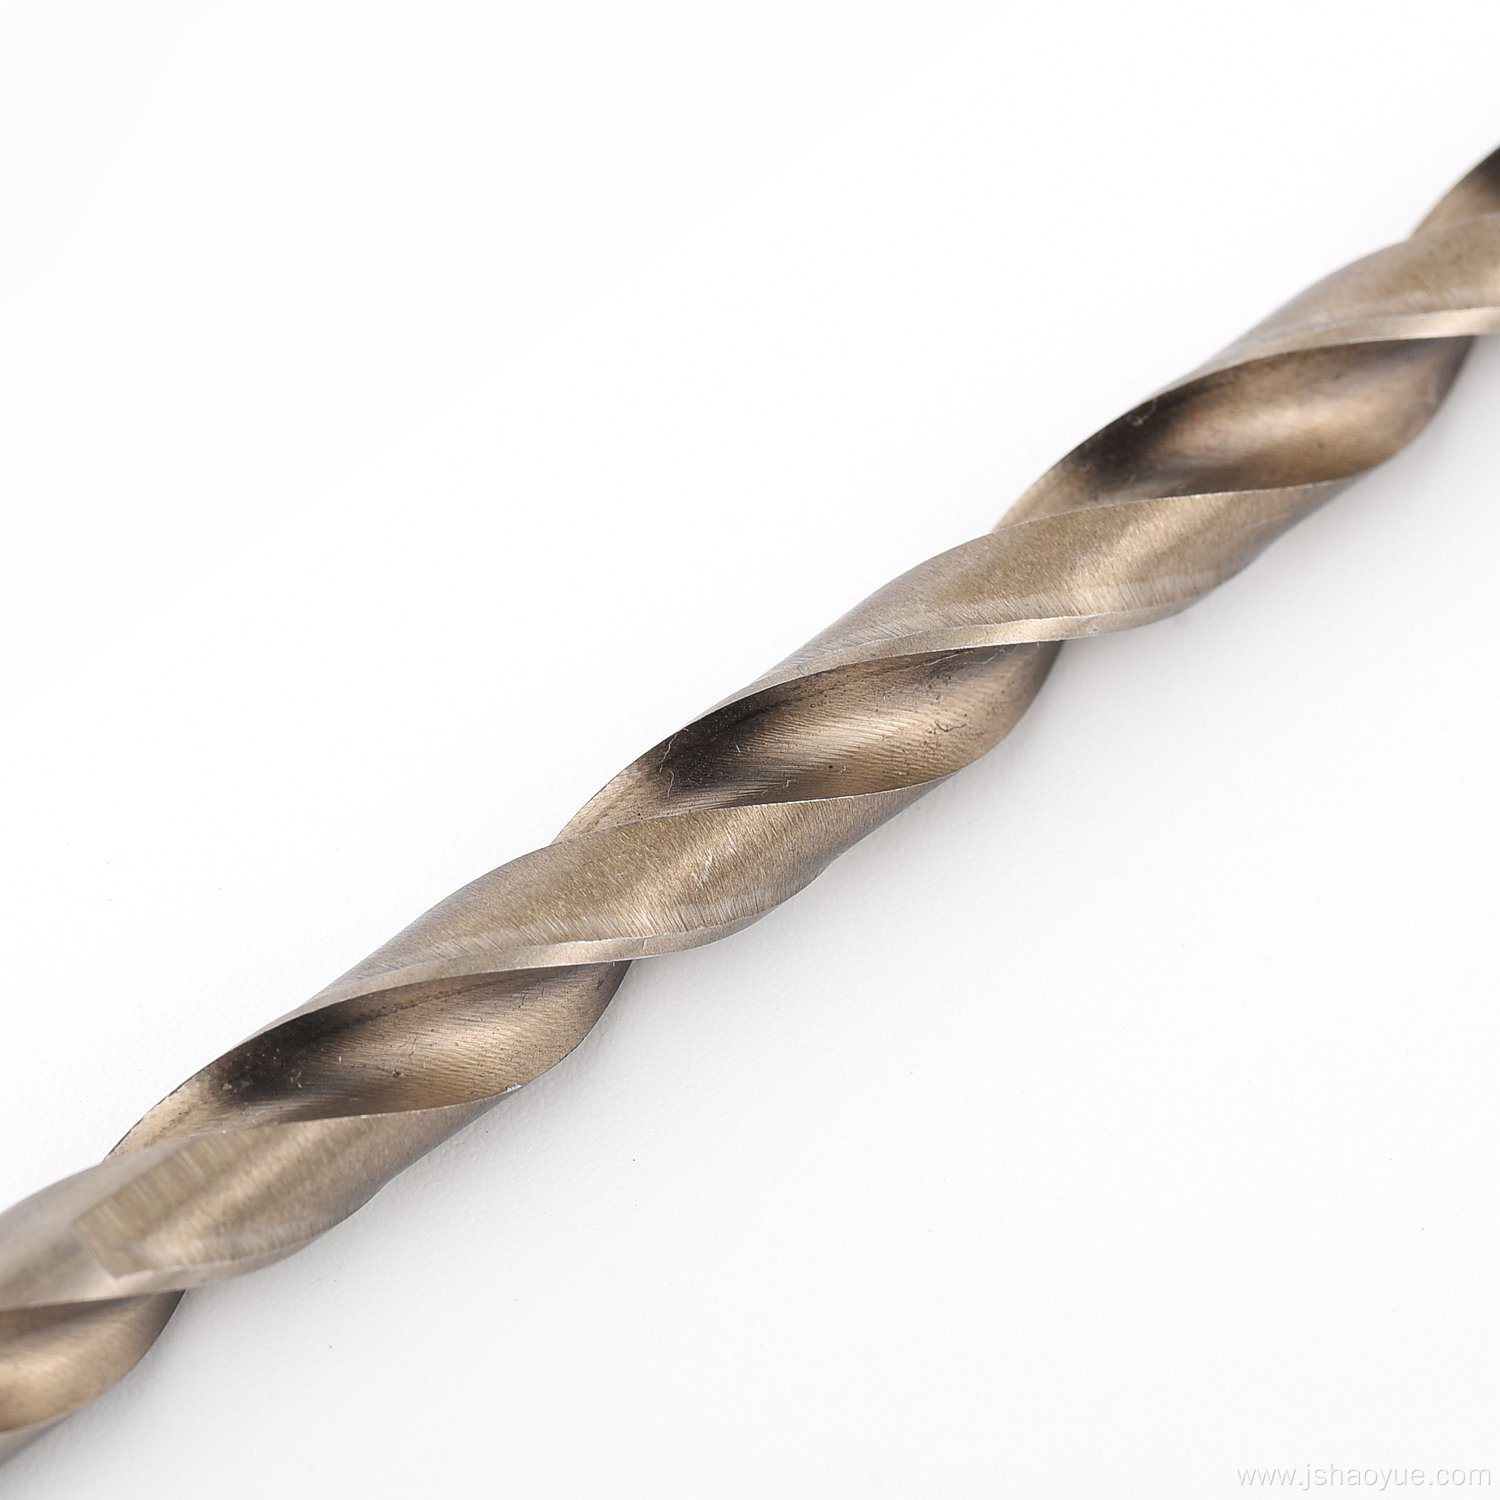 Twist Drill Bit for Drilling Metal Stainless Steel